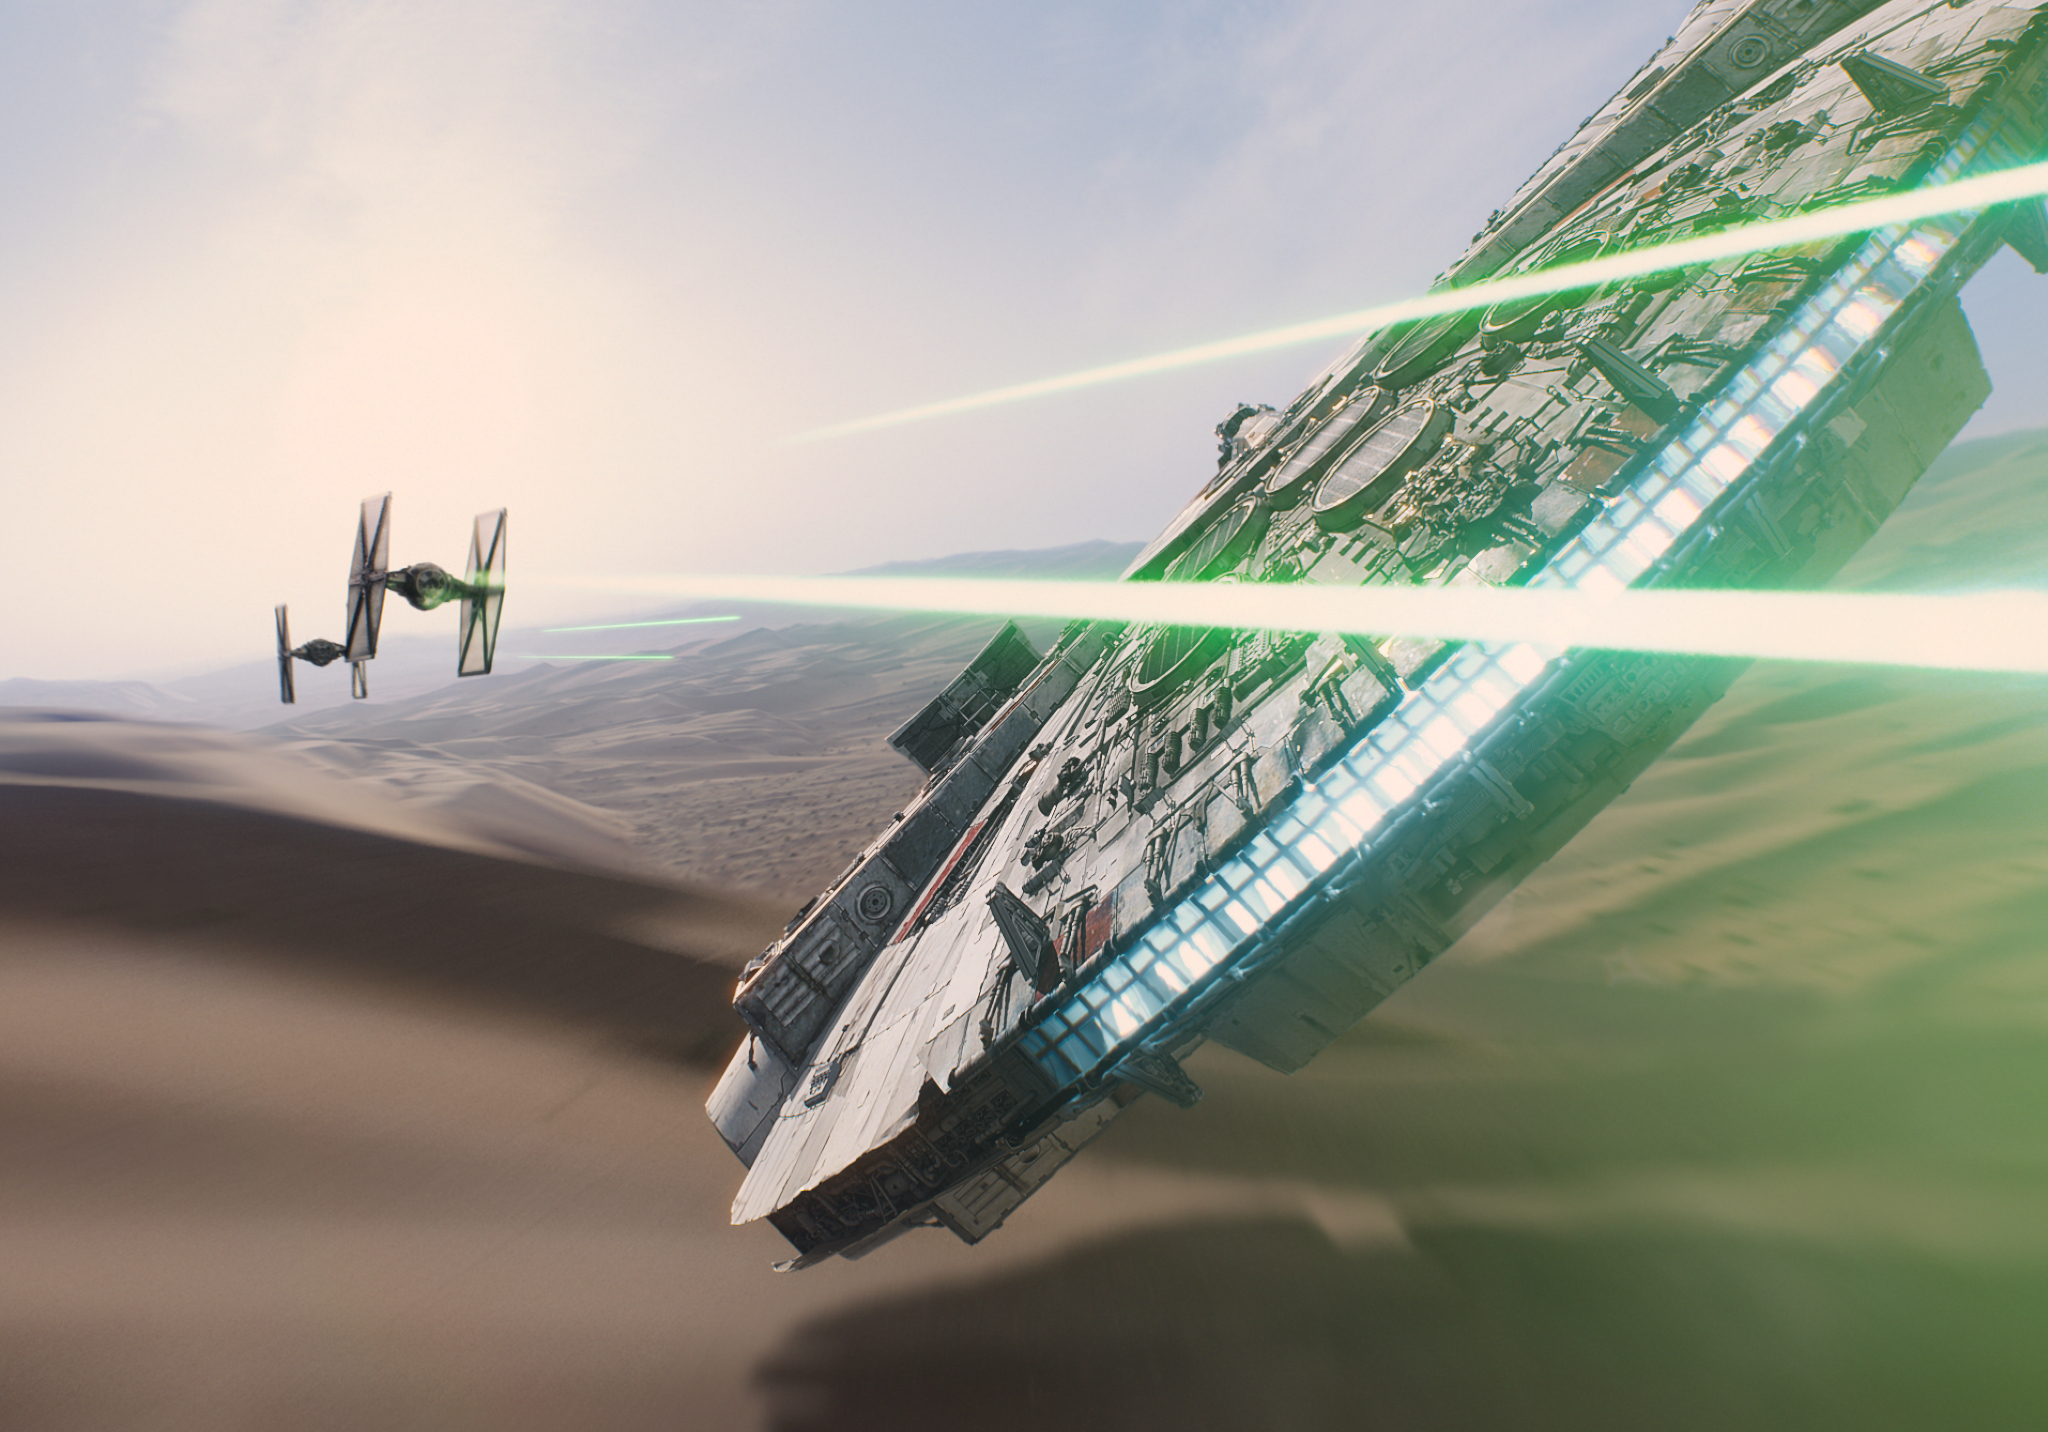 The Force is Strong with this Star Wars Episode VII Teaser Trailer